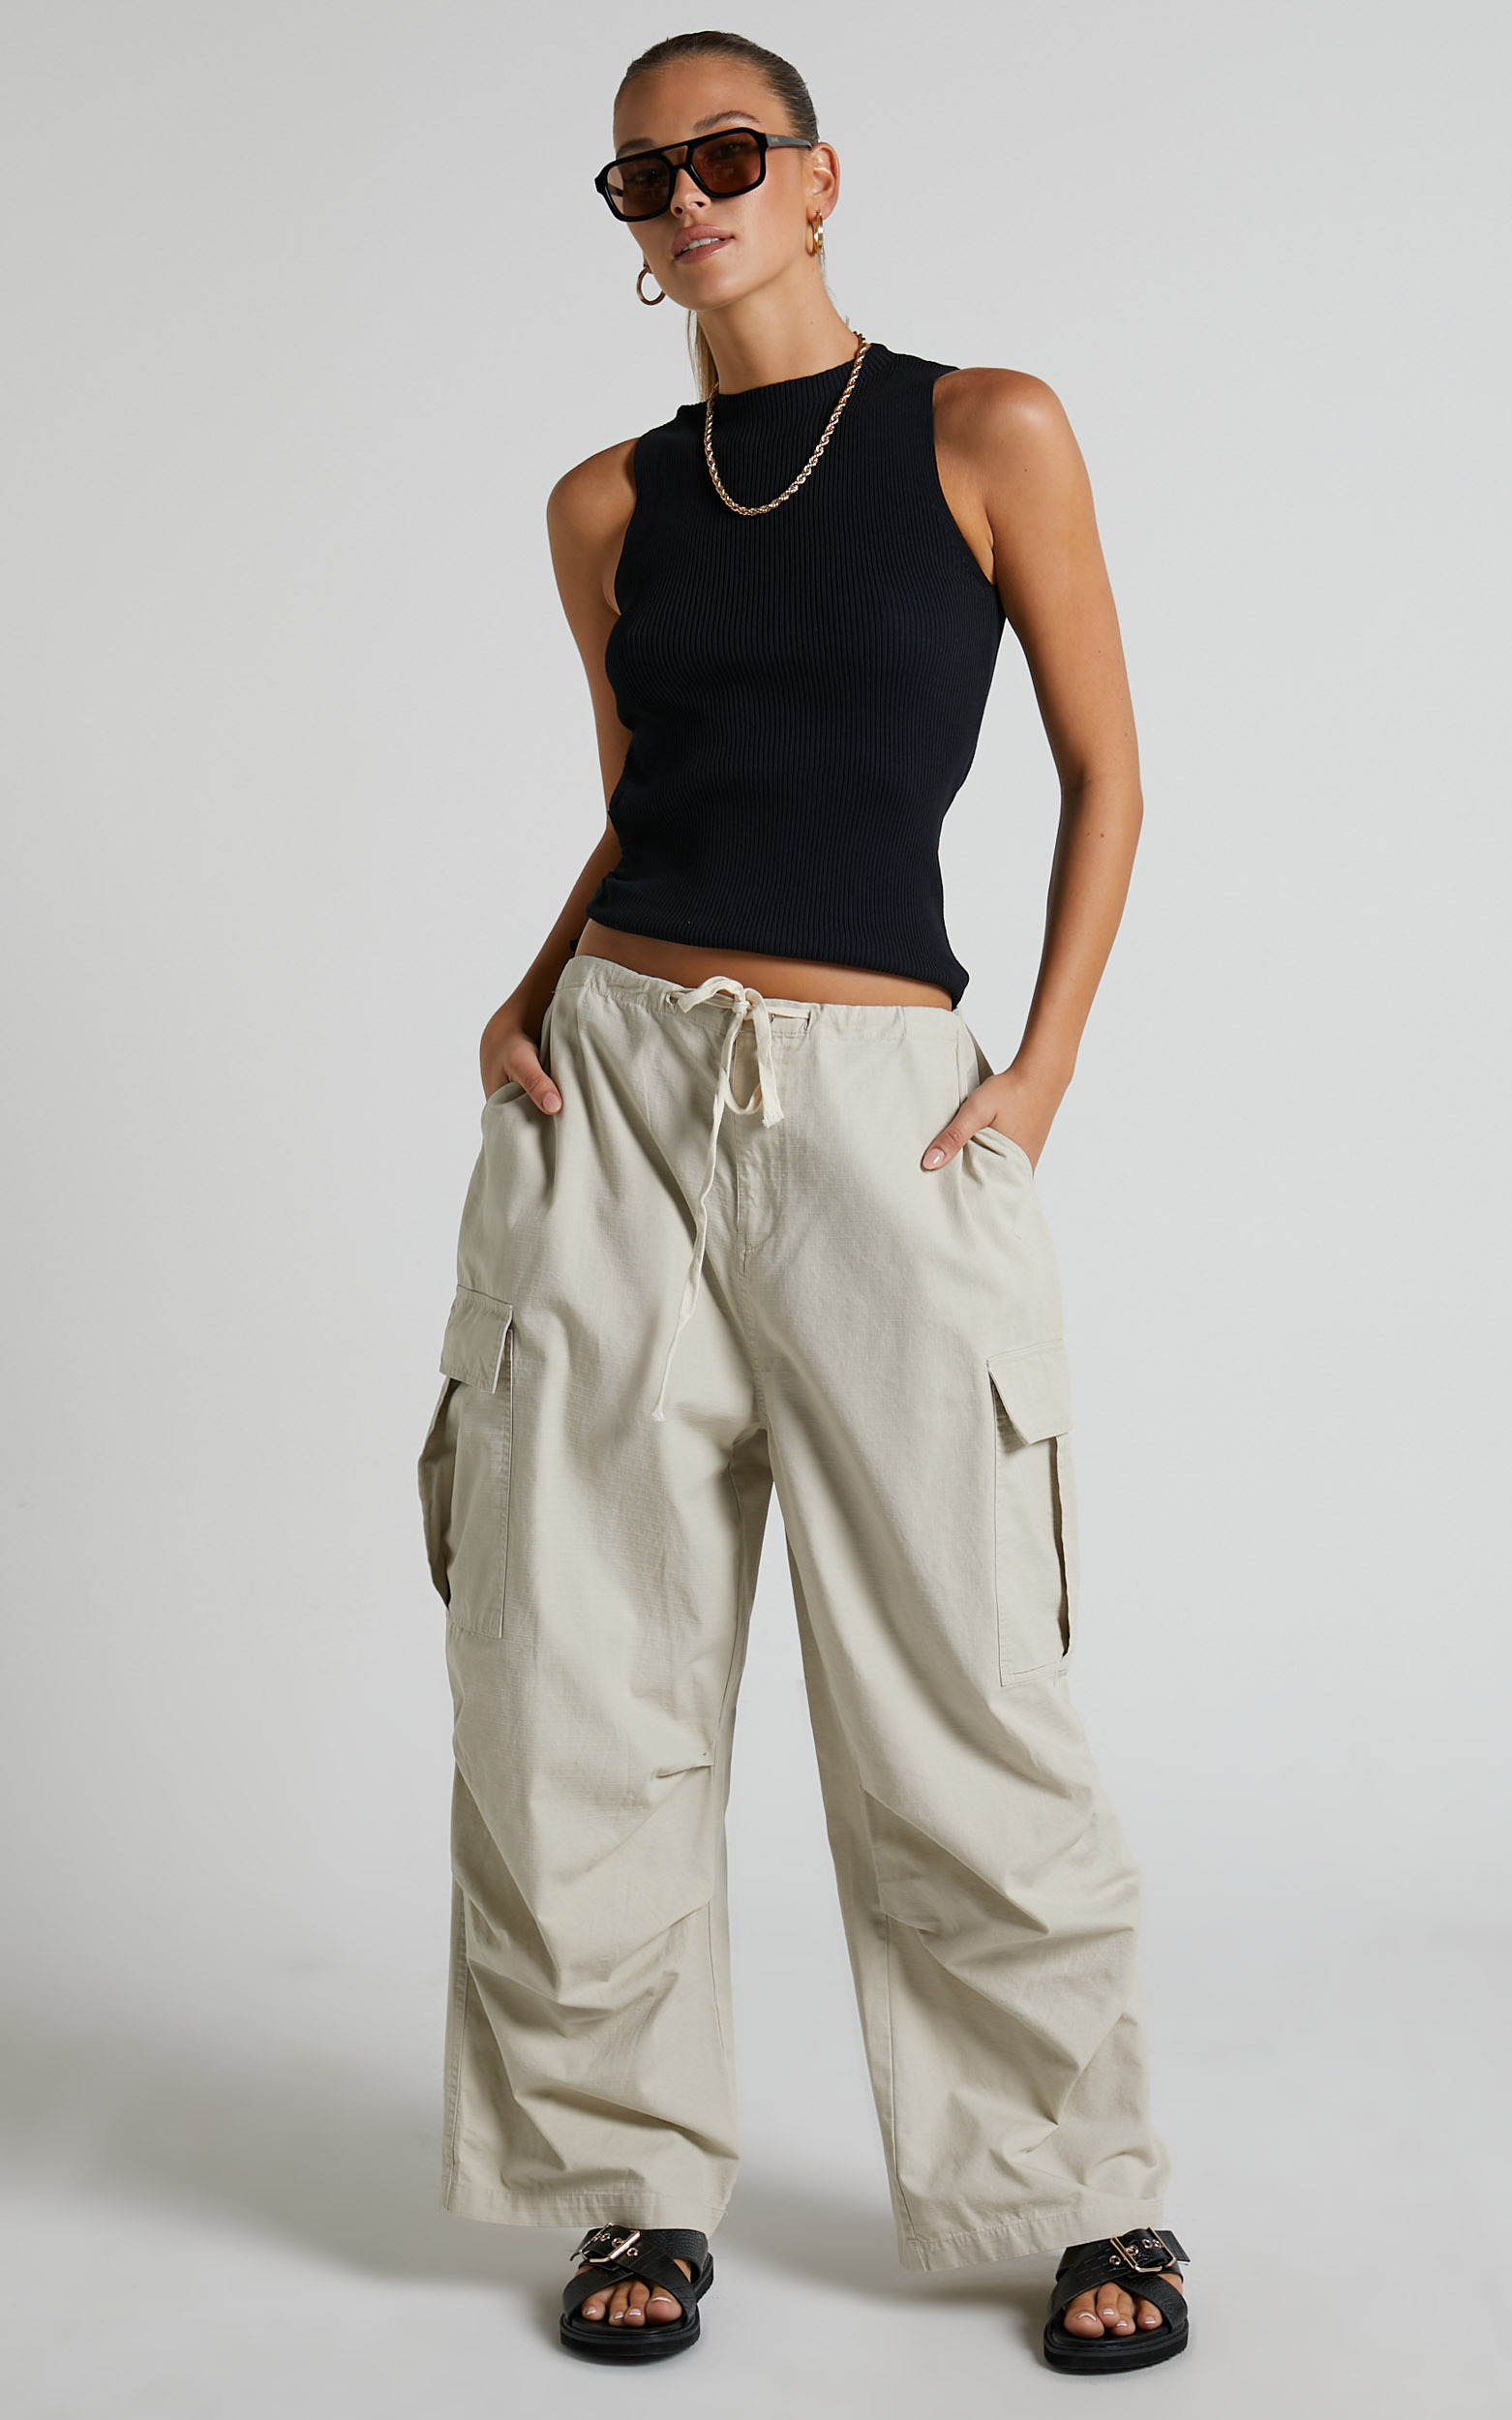 Lioness - Low Rise Utility Pant in Stone | Showpo